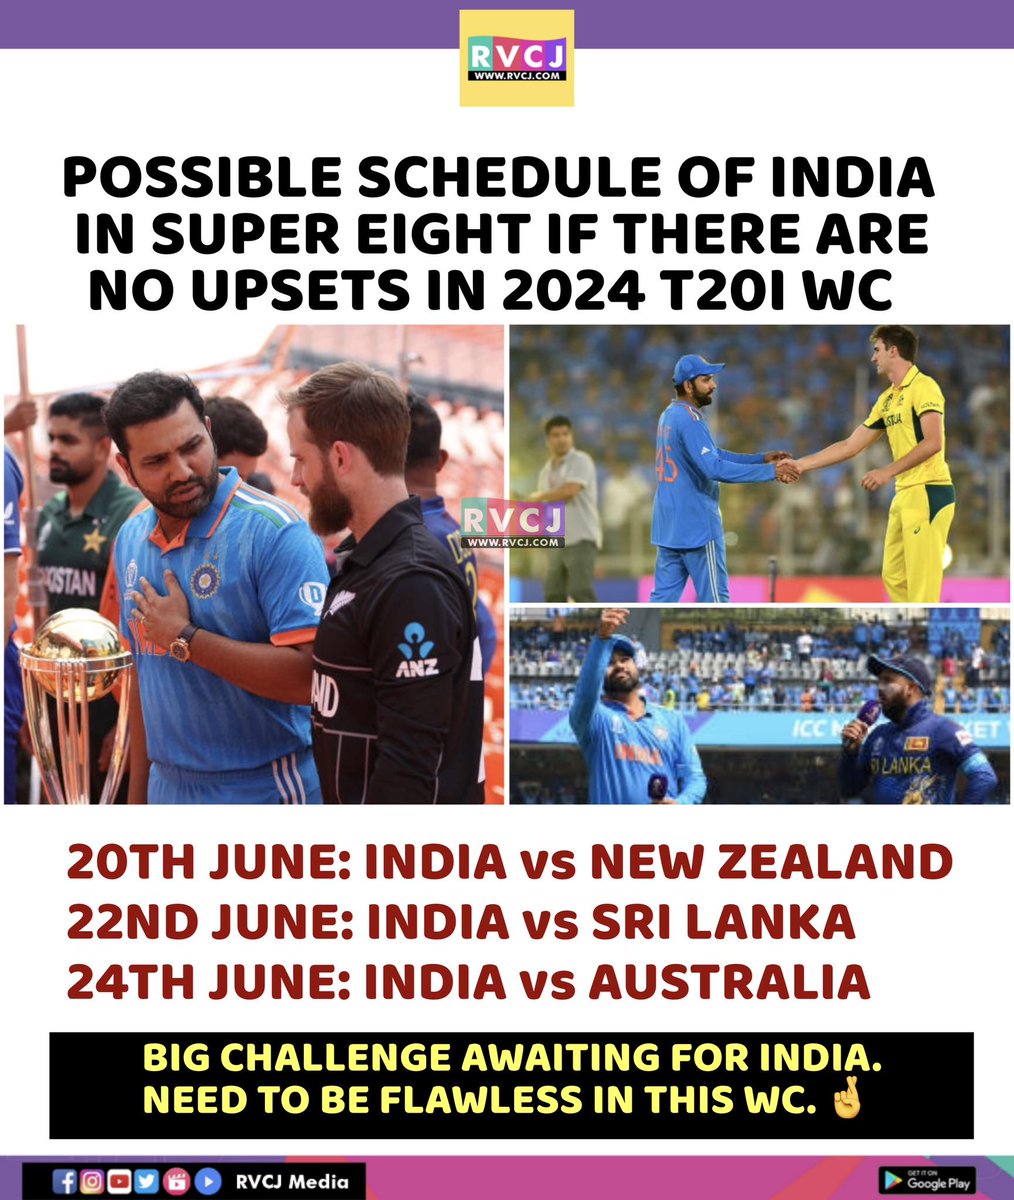 India's Possible Schedule